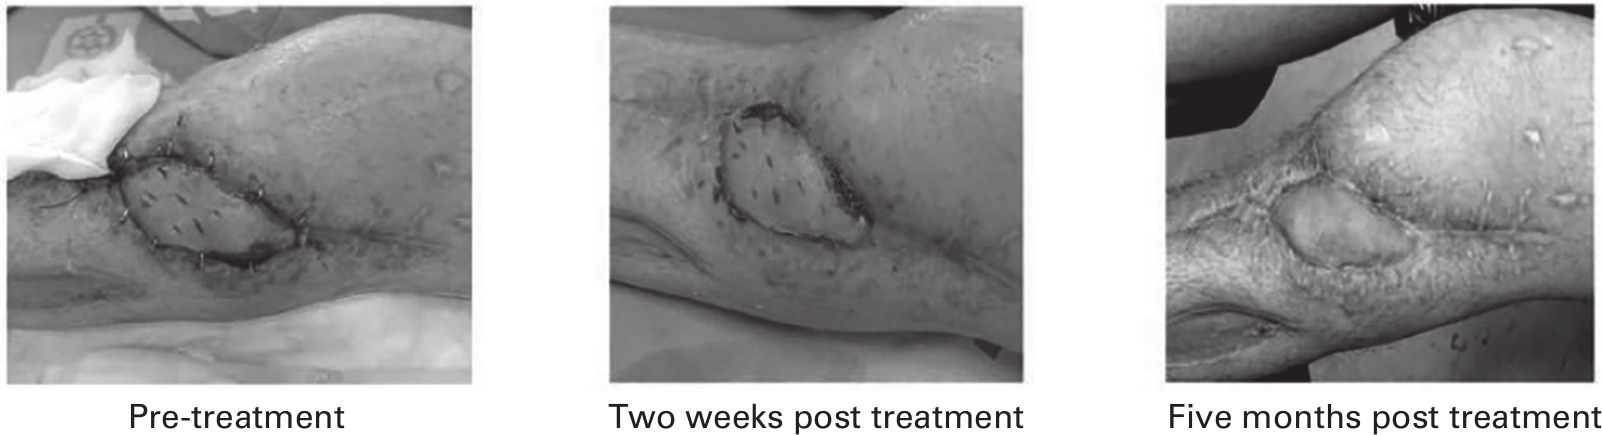 Fig. 6 
            Wound healing of a patient as induced by phage treatment. Before treatment, the flap edges did not heal well, with dehiscence and evisceration. By two weeks after treatment, the wound had completely healed and there was no dehiscence and evisceration of flap. By five months after treatment, complete healing of the wound was observed. Adapted from Nir-Paz et al.40
          